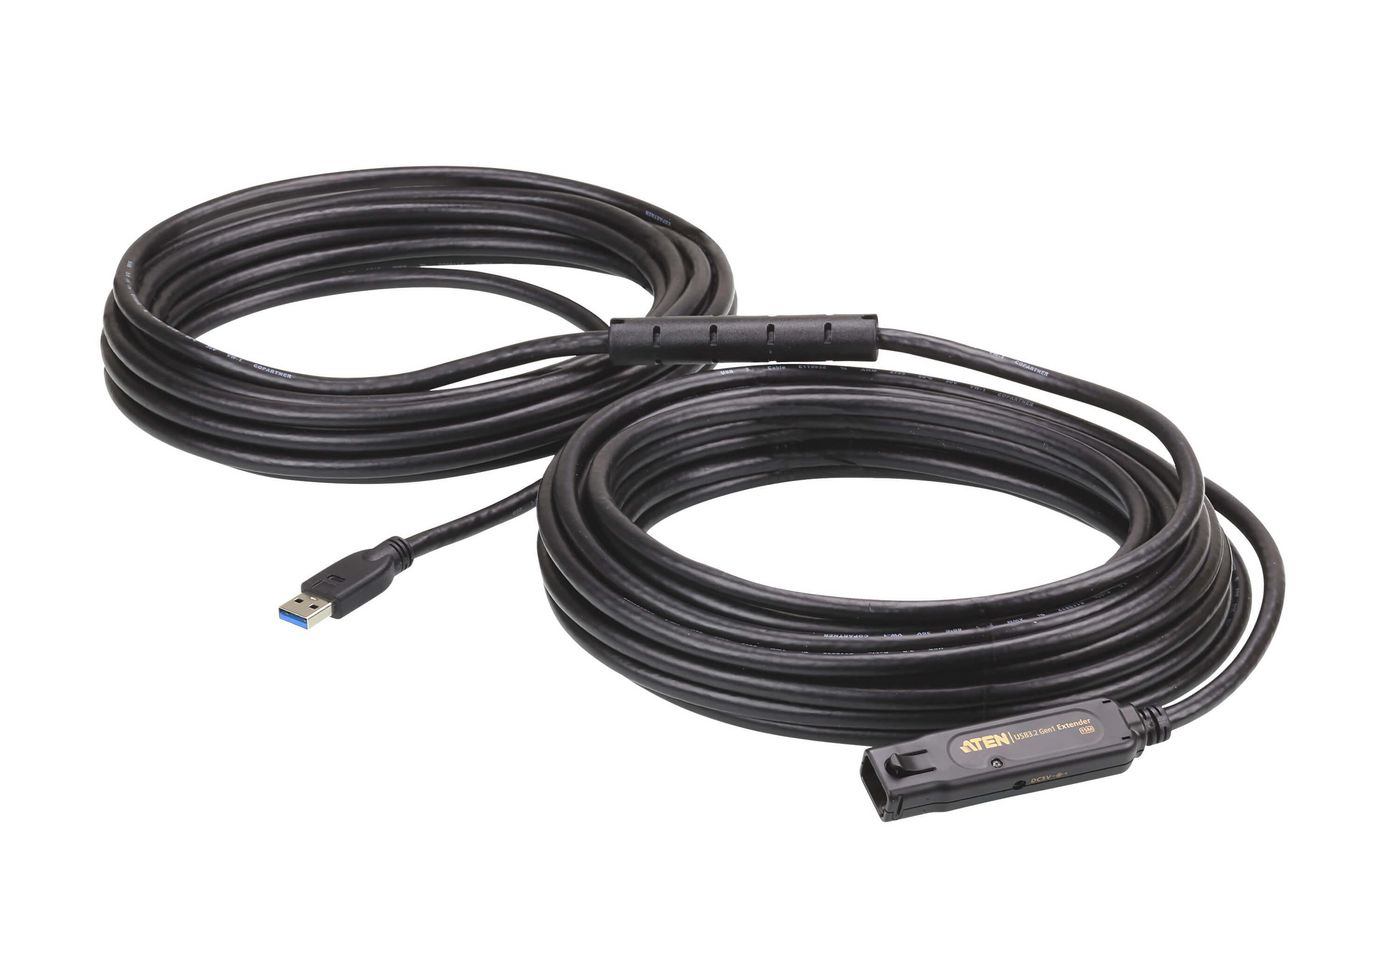 Aten UE3315A-AT-G W125985379 USB 3.0 Extender Cable 15m, 